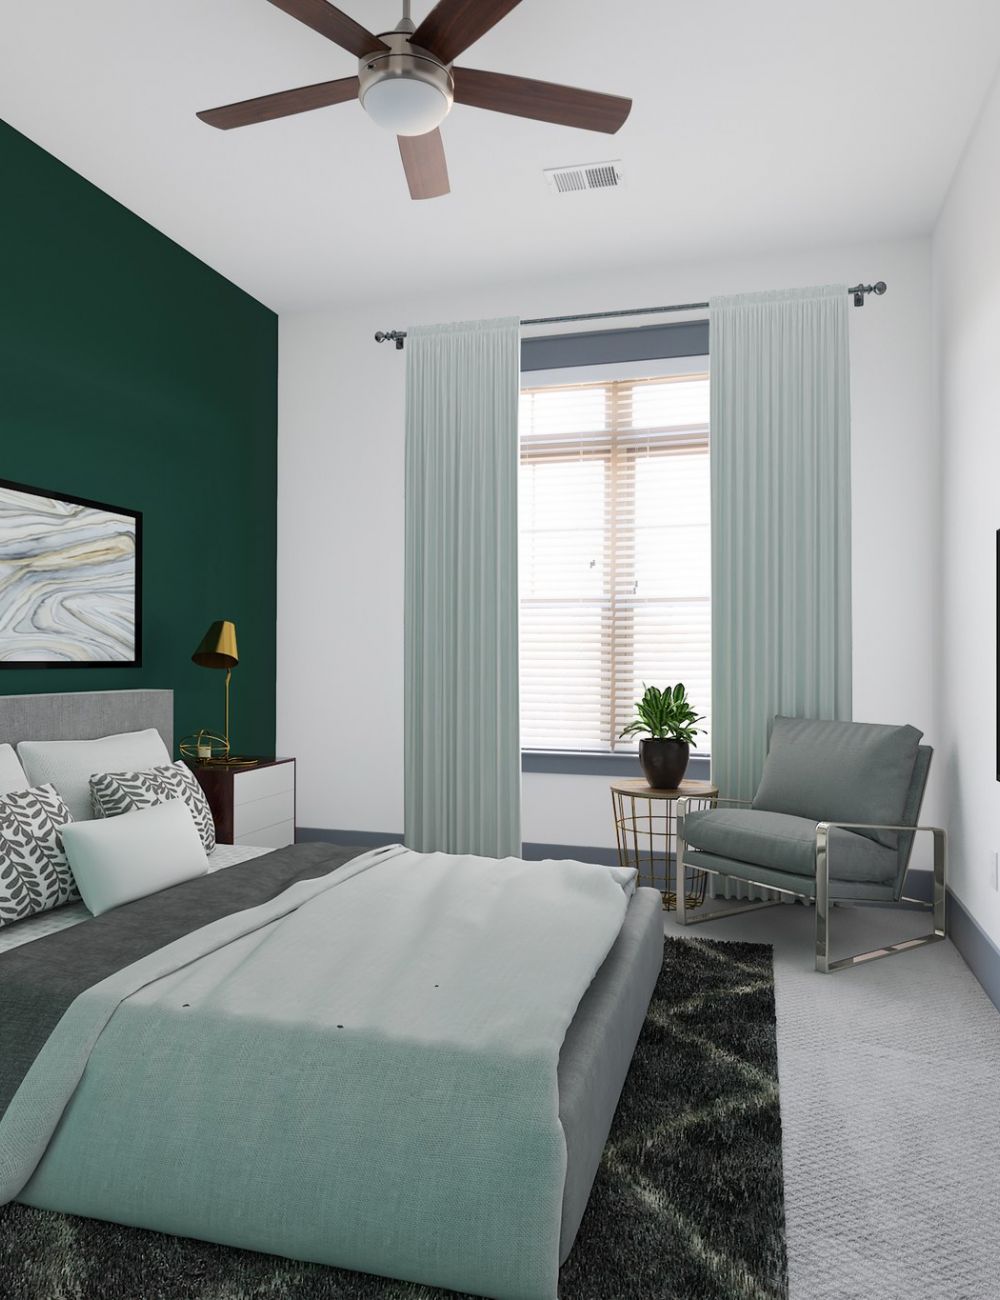 Luxury apartment bedroom with green accent wall, large window, carpet, comfy bed, and large screen TV